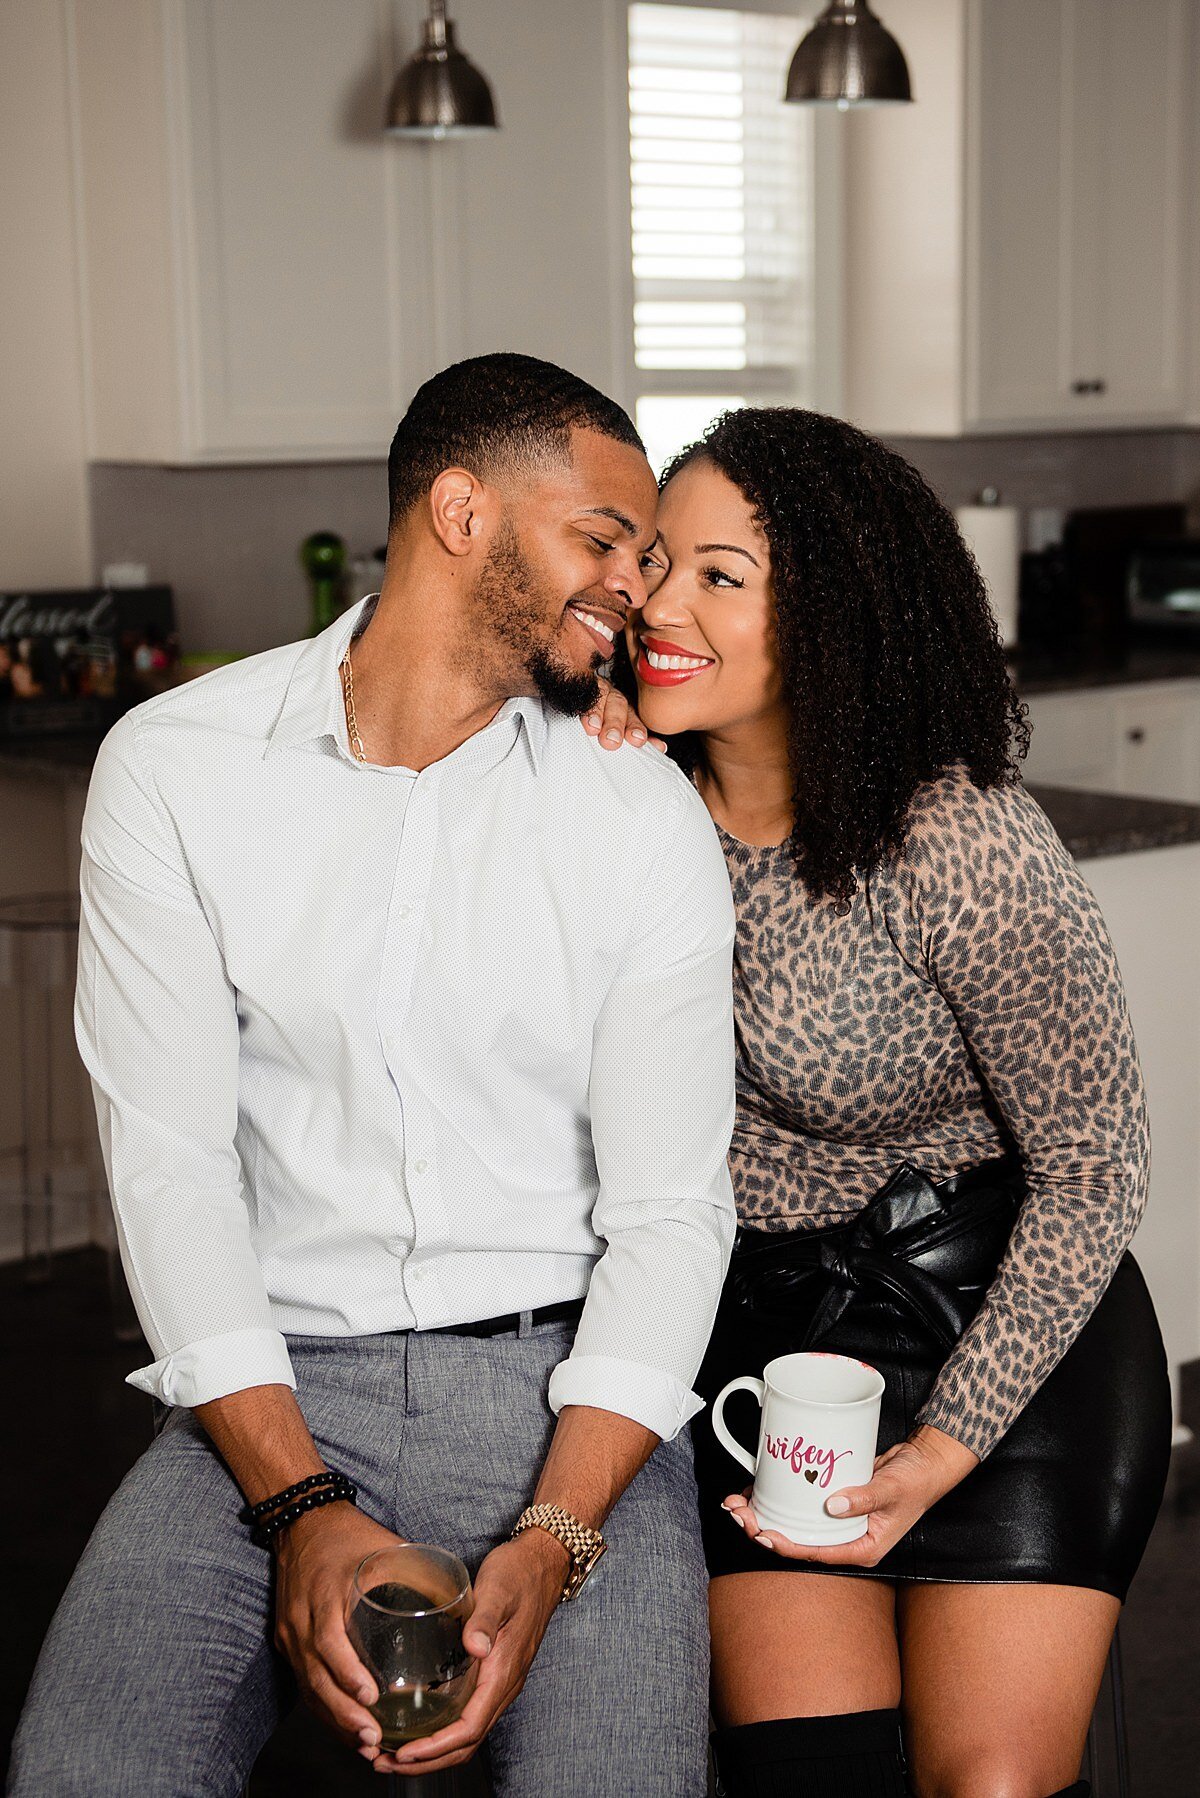 Couple holding coffee mugs and snuggled together in their new kitchen